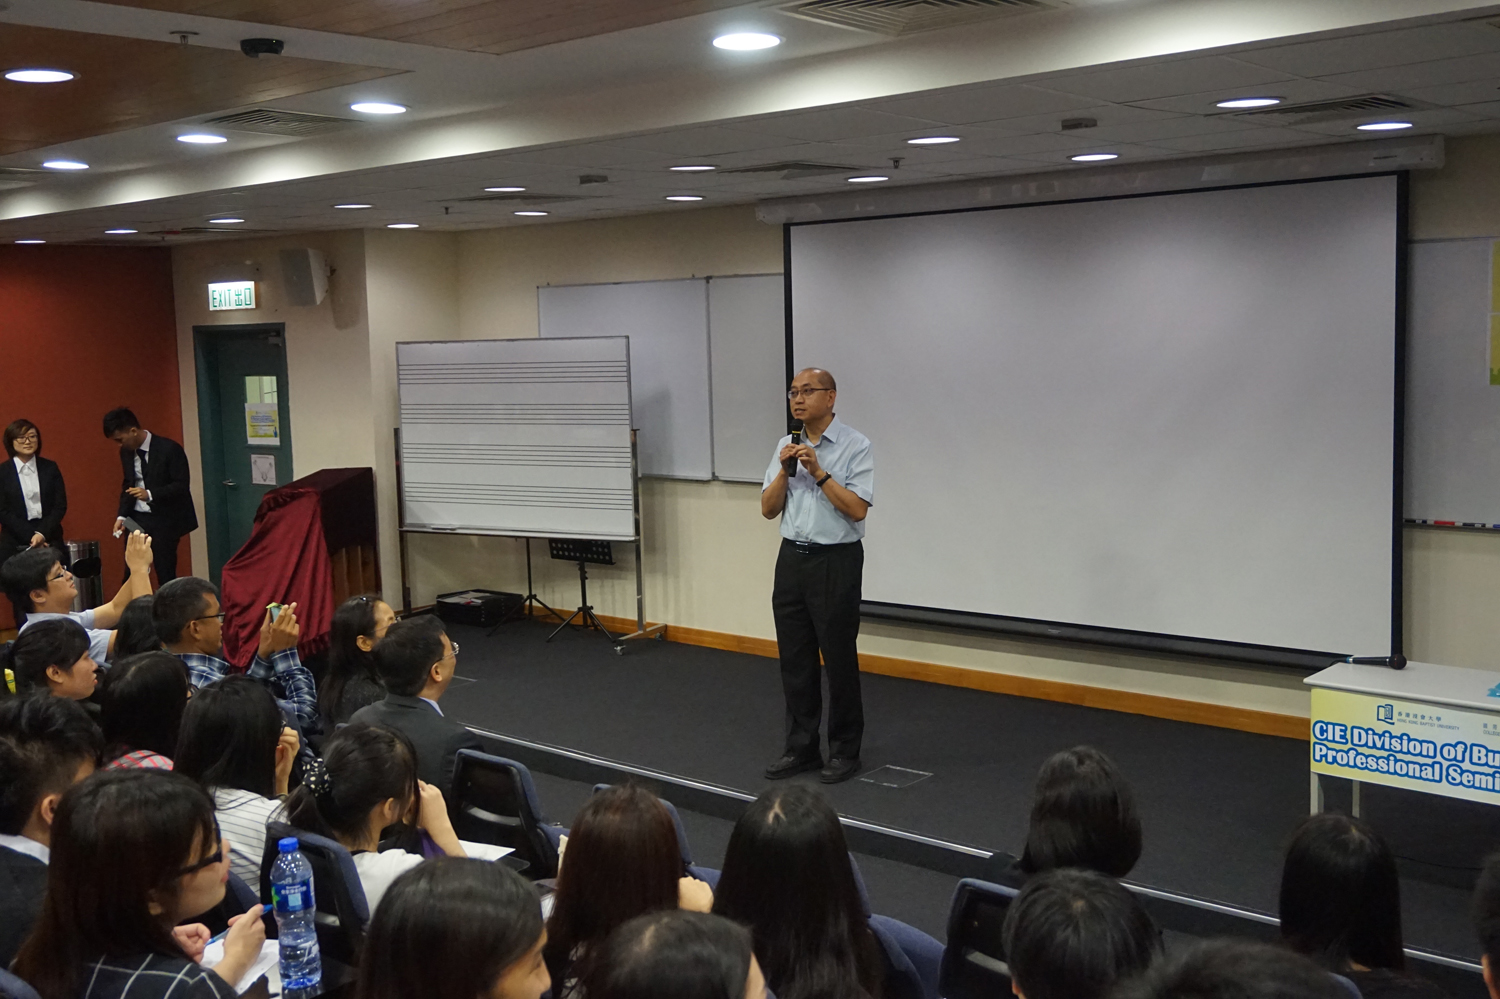 Prof. Siu Wai Sum, Department of Marketing of HKBU shared the tips and techniques for university interviews.